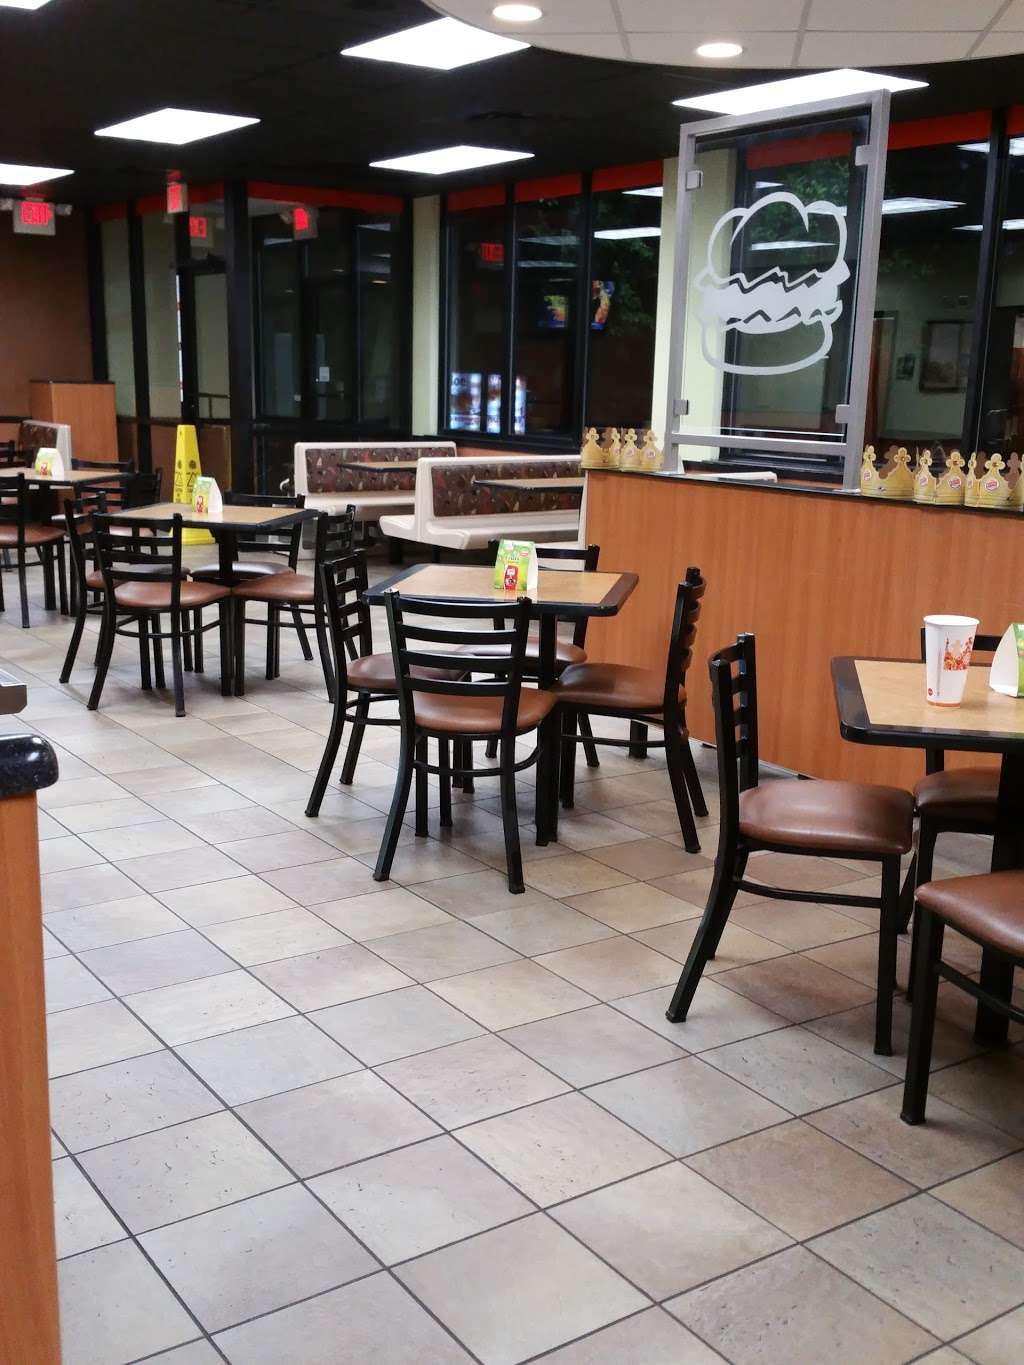 Burger King | 1735 Route 35 &, 18th Ave, Wall Township, NJ 07719 | Phone: (732) 681-9610